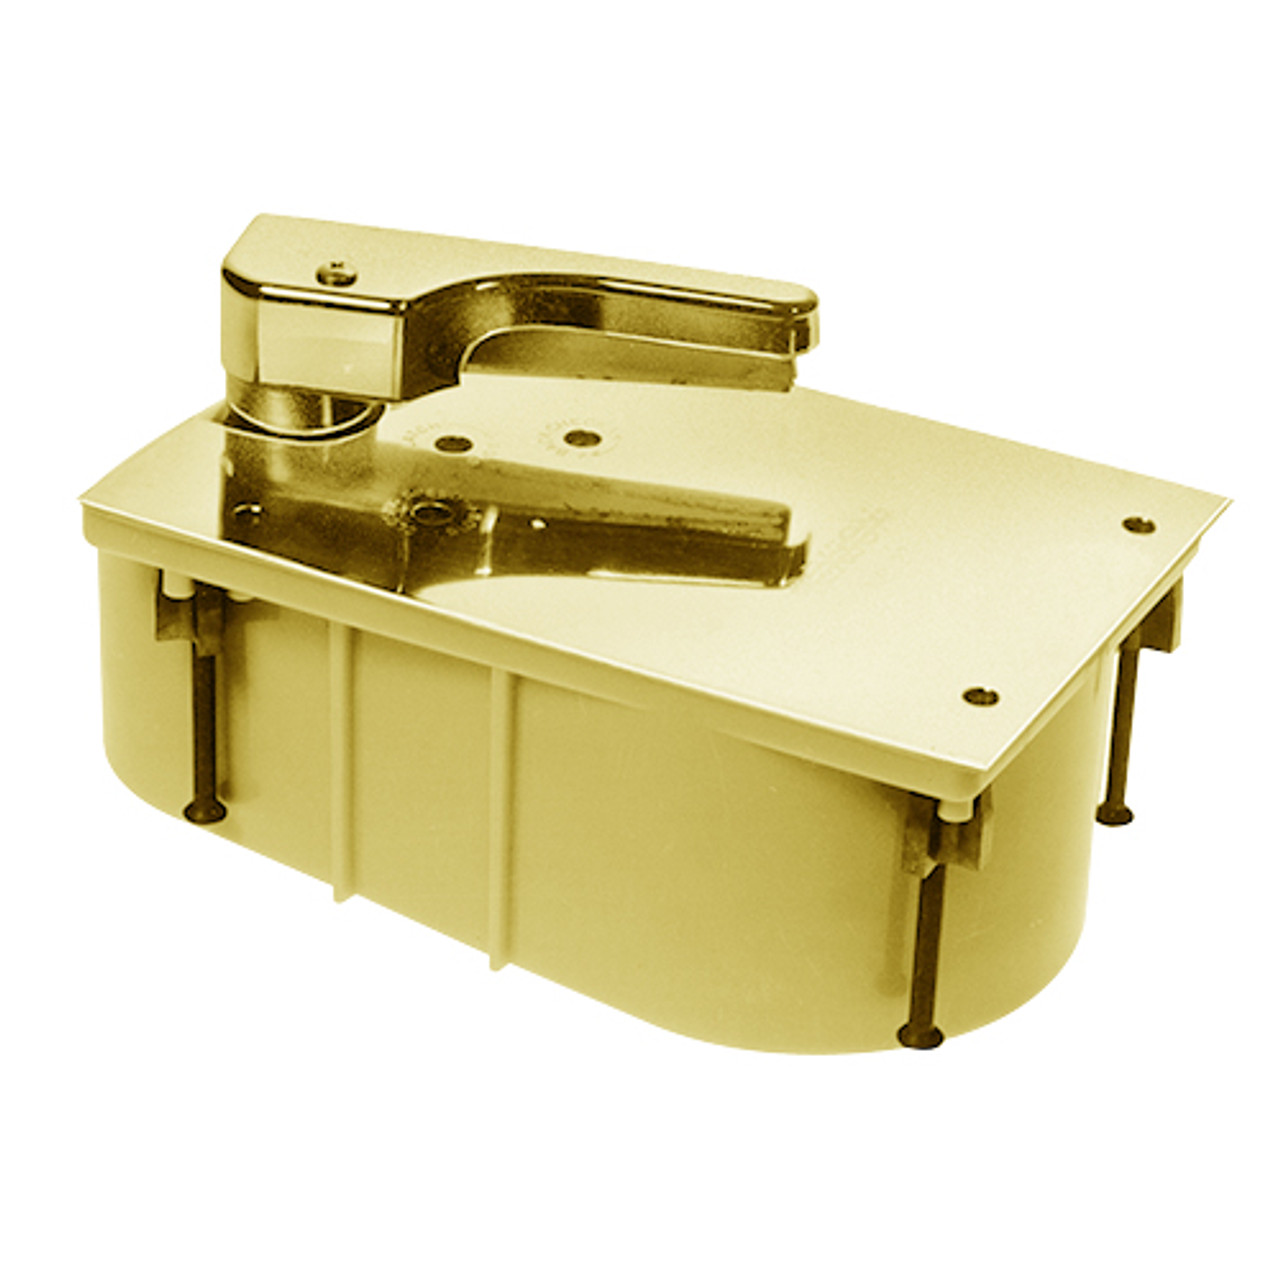 HM27-95N-LFP-CWF-LH-605 Rixson 27 Series Heavy Duty Offset Hung Floor Closer with HM Door and Frame Preps in Bright Brass Finish